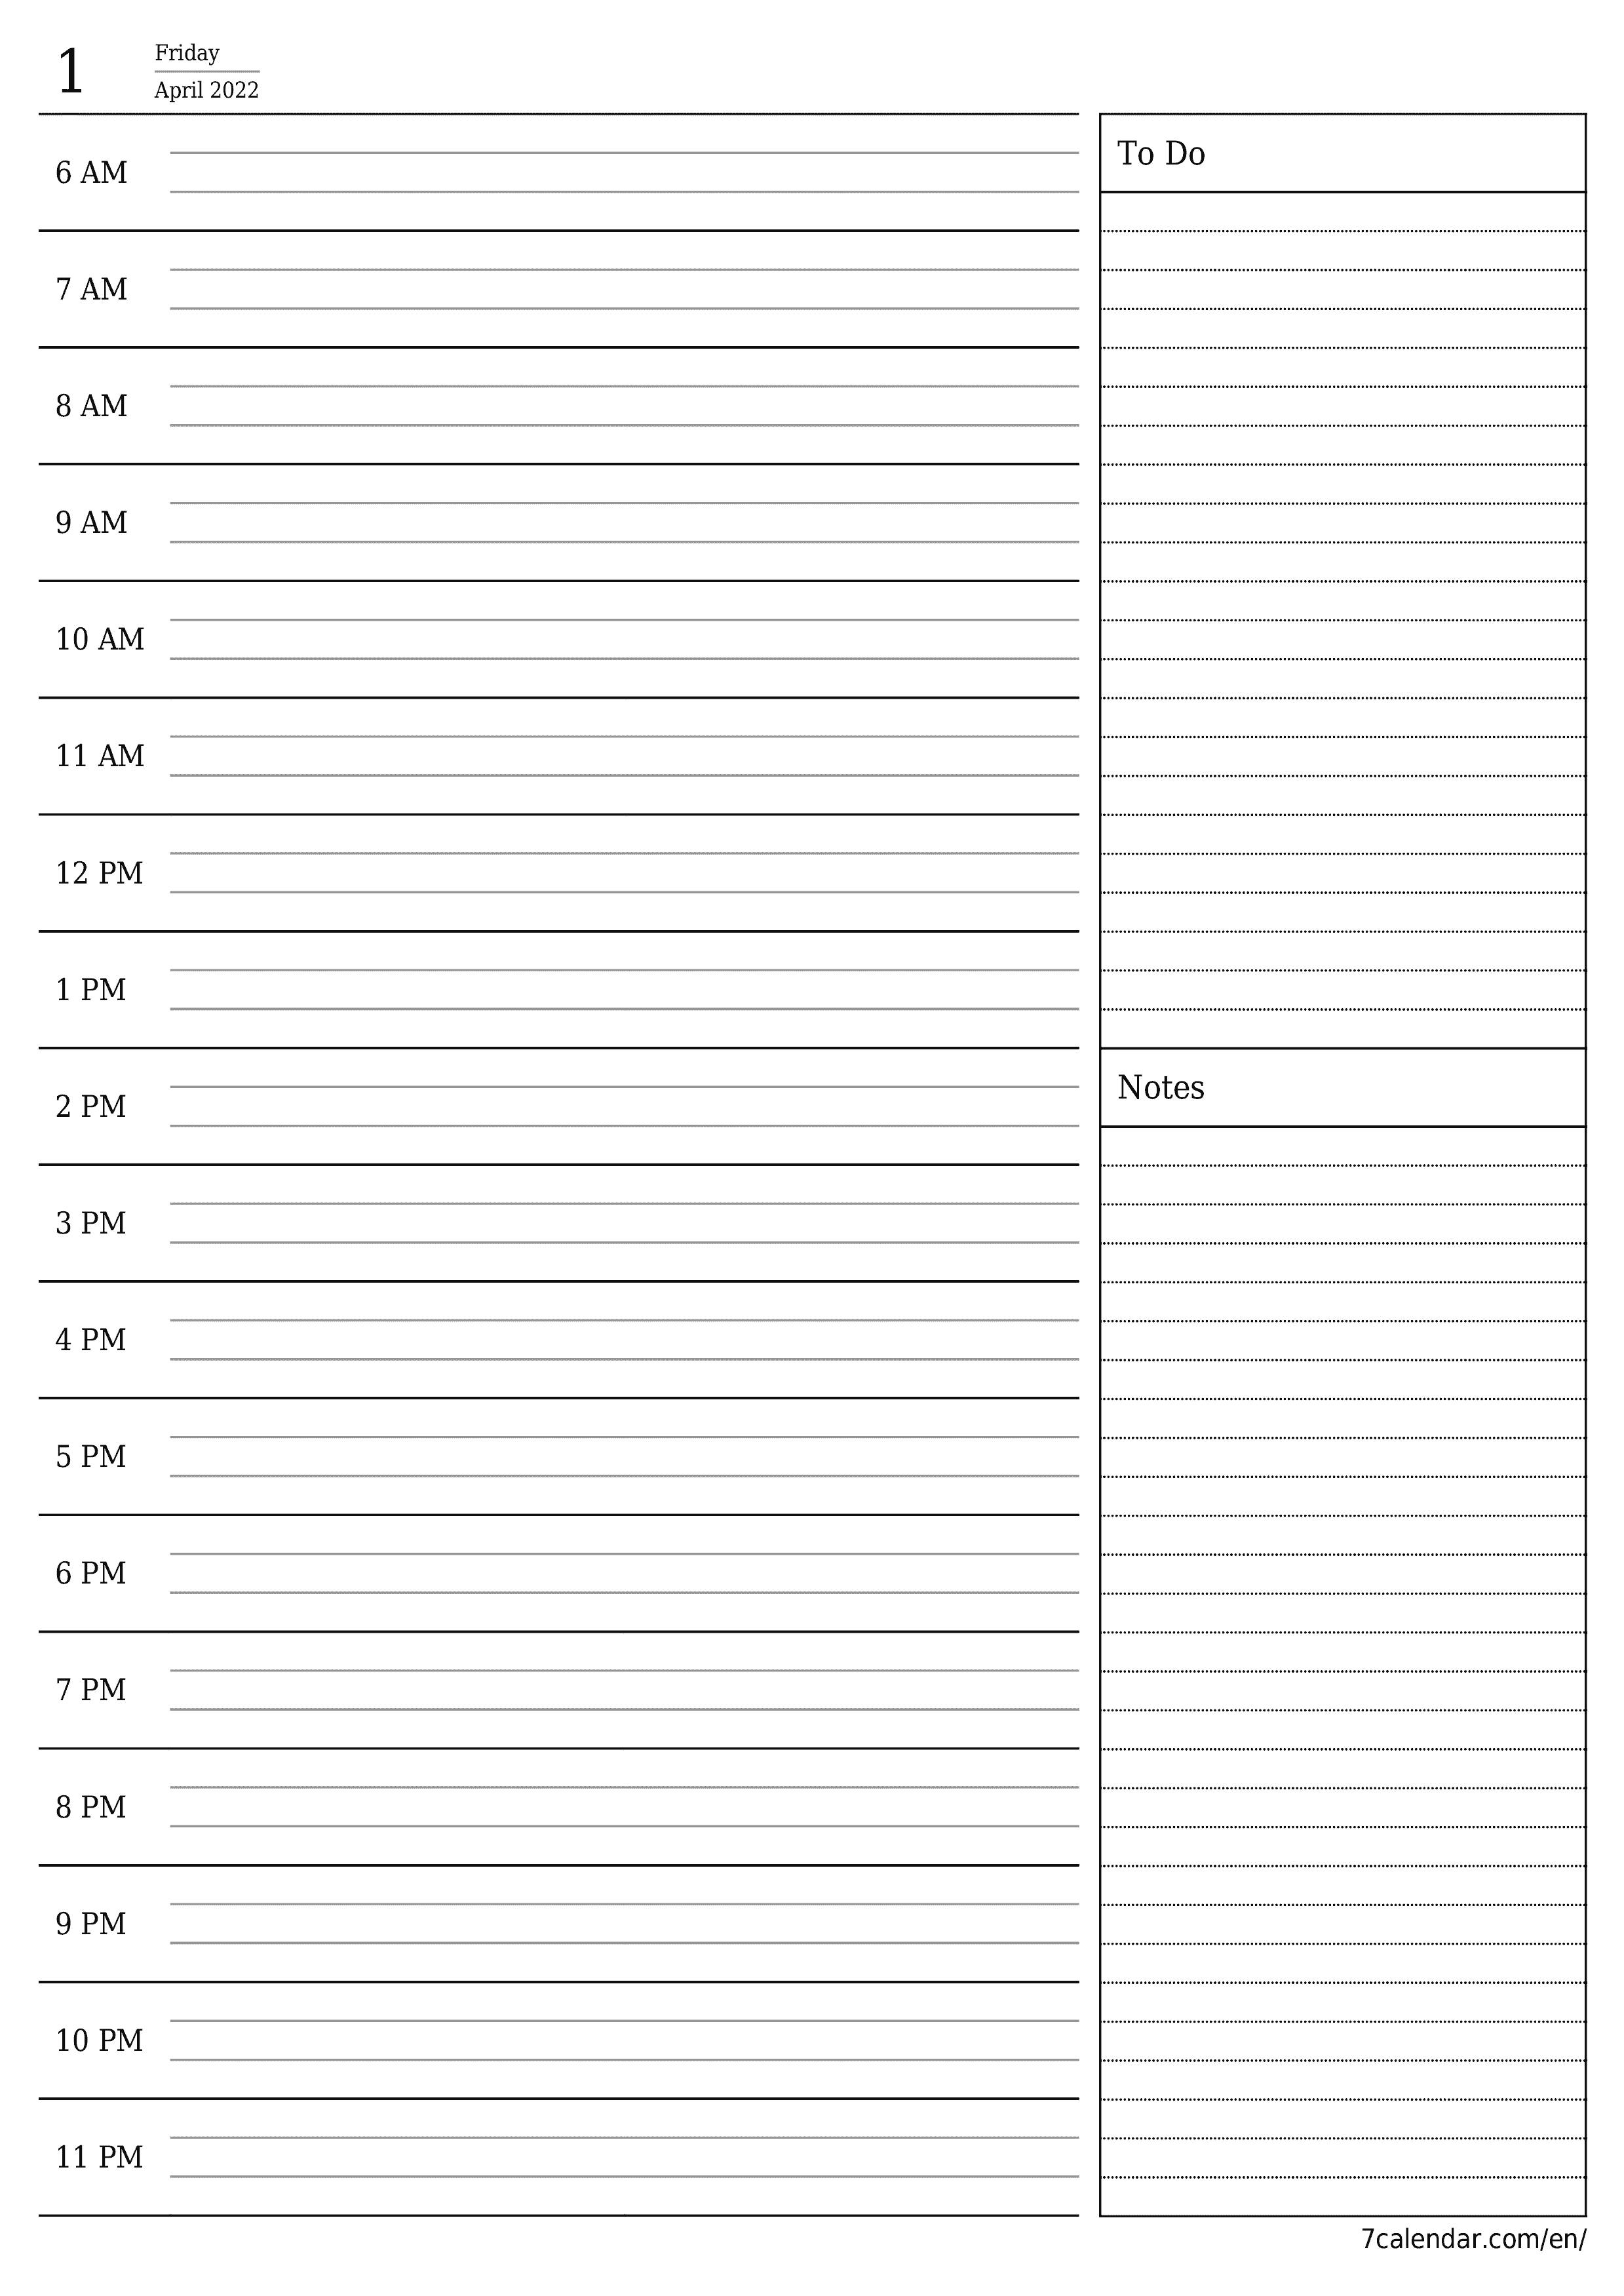 printable wall template free vertical Daily planner calendar April (Apr) 2022